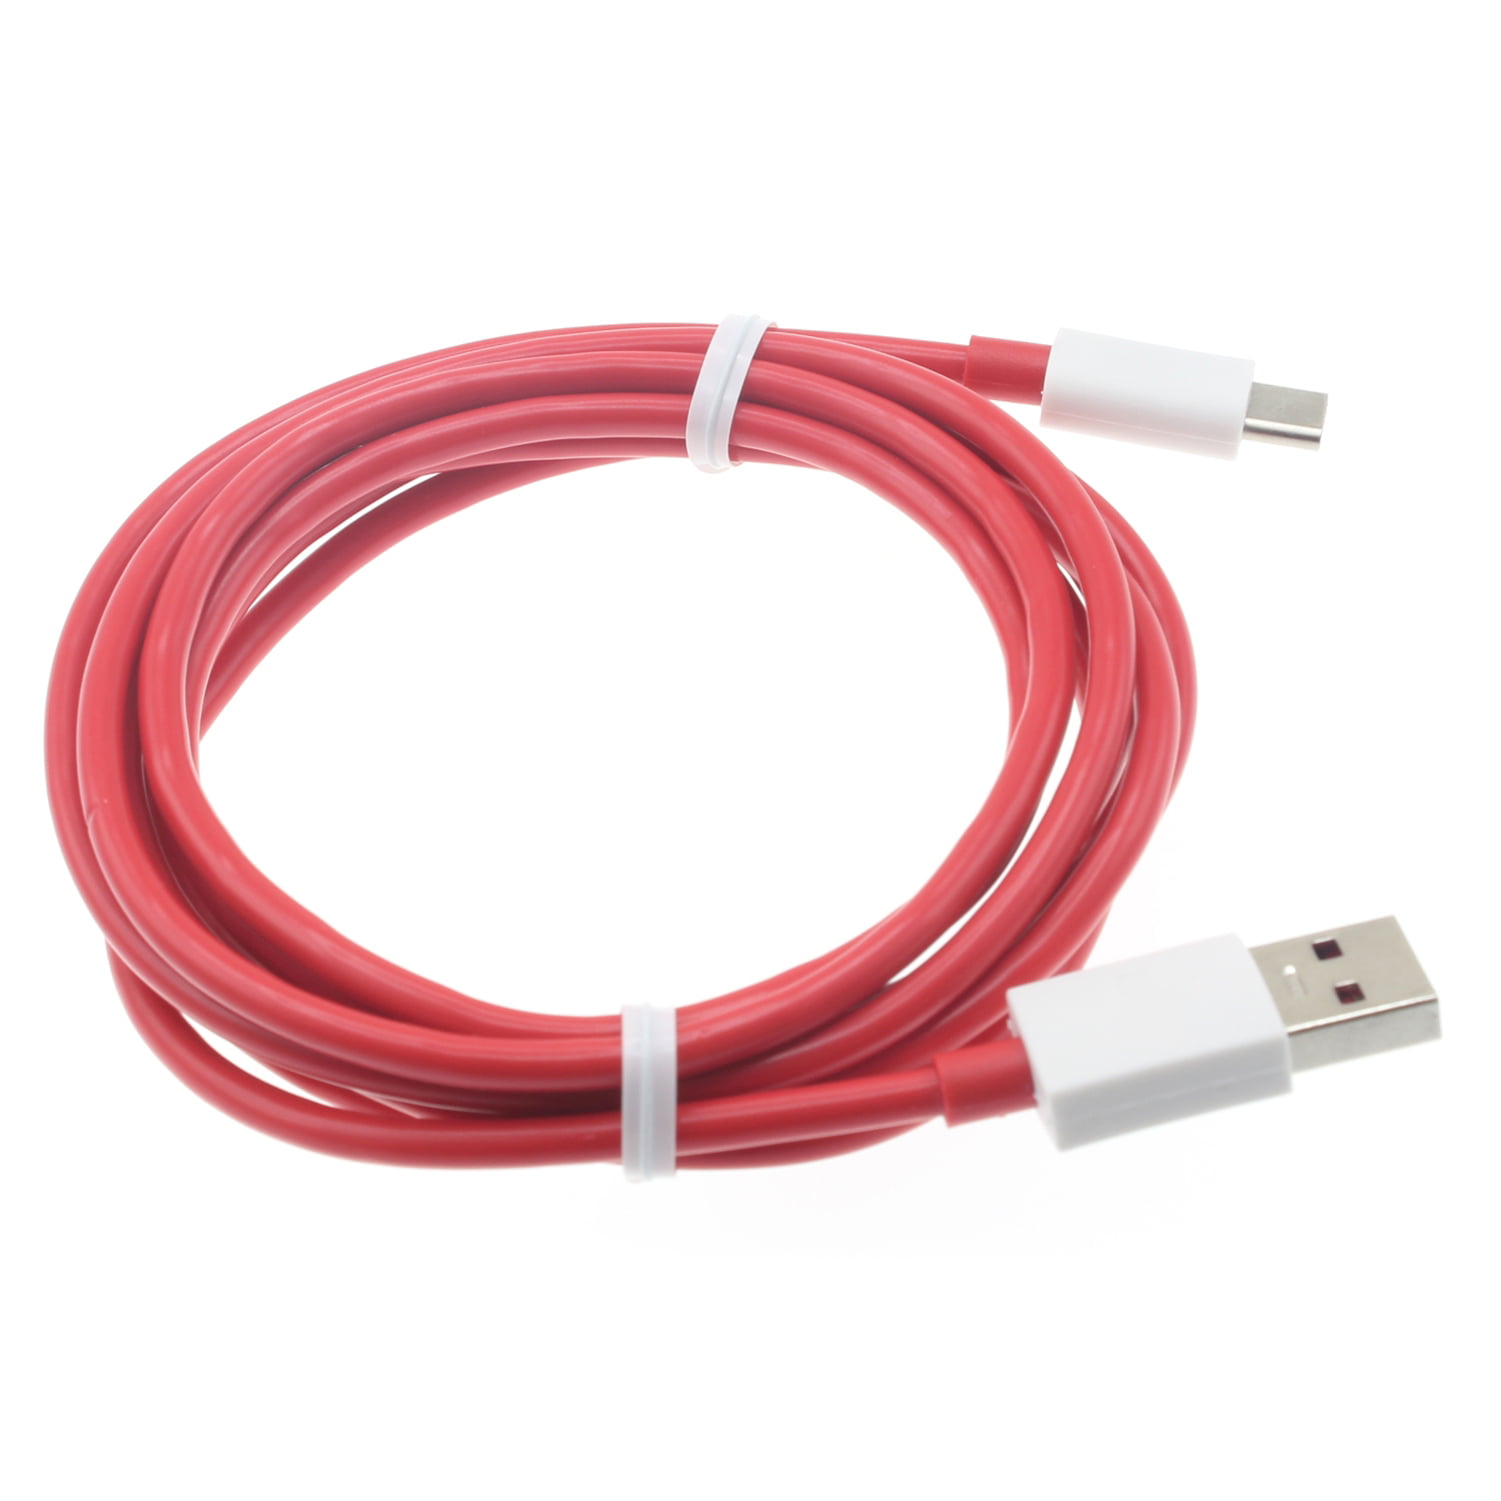 6FT LONG USB-C CABLE TYPE-C FAST CHARGER CORD POWER WIRE RED for PHONES TABLETS 